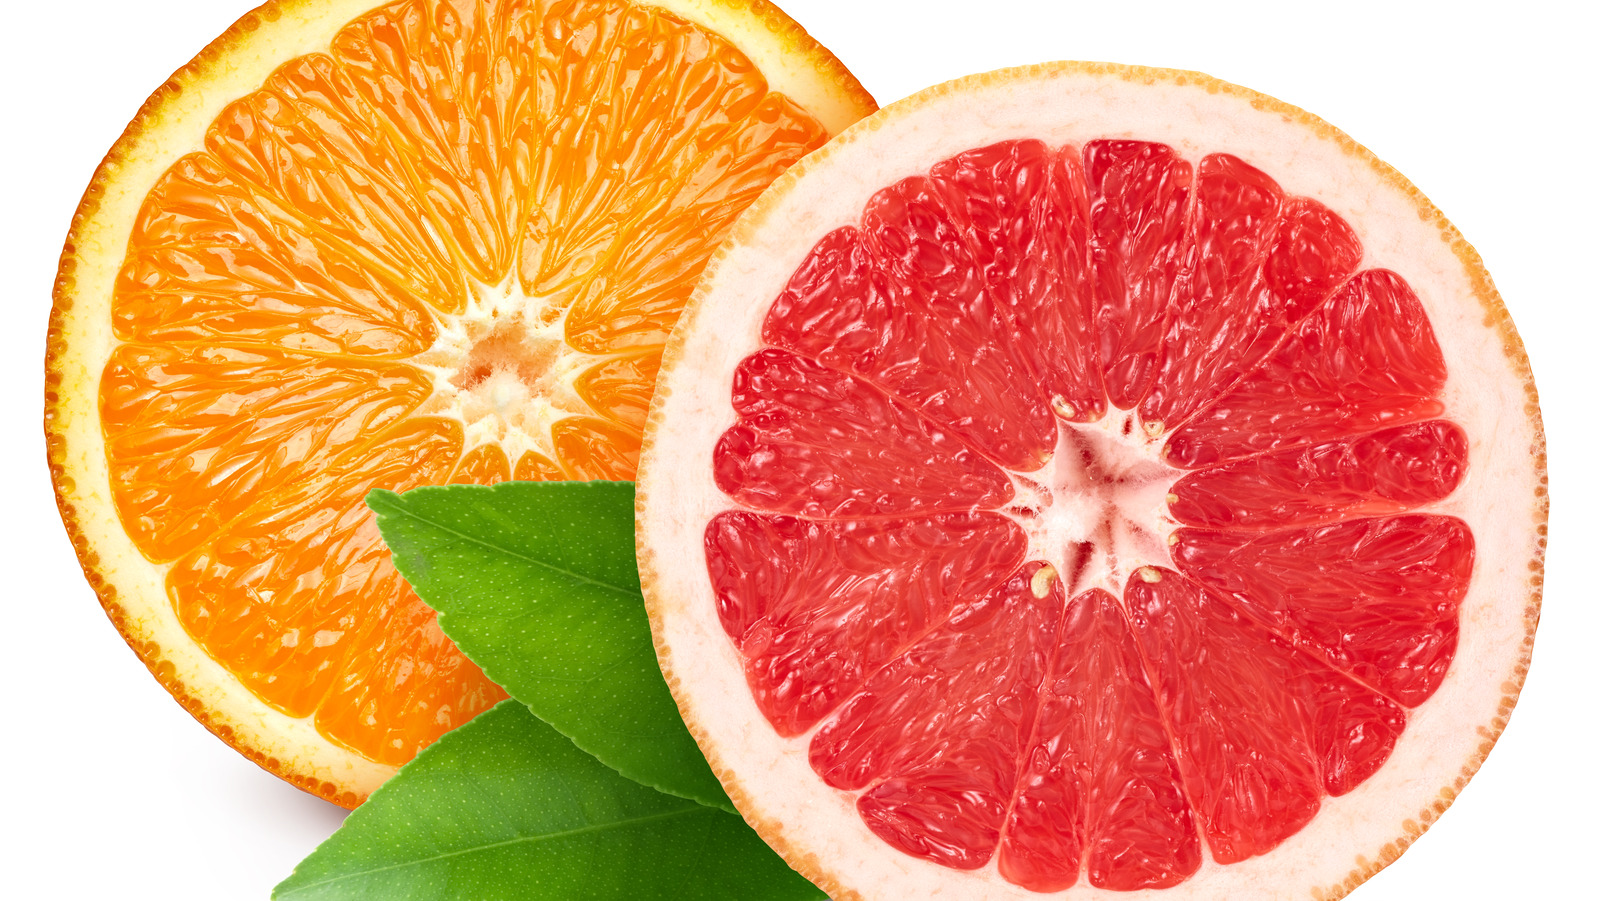 Is There A Difference Grapefruits And Oranges? Between Nutritional